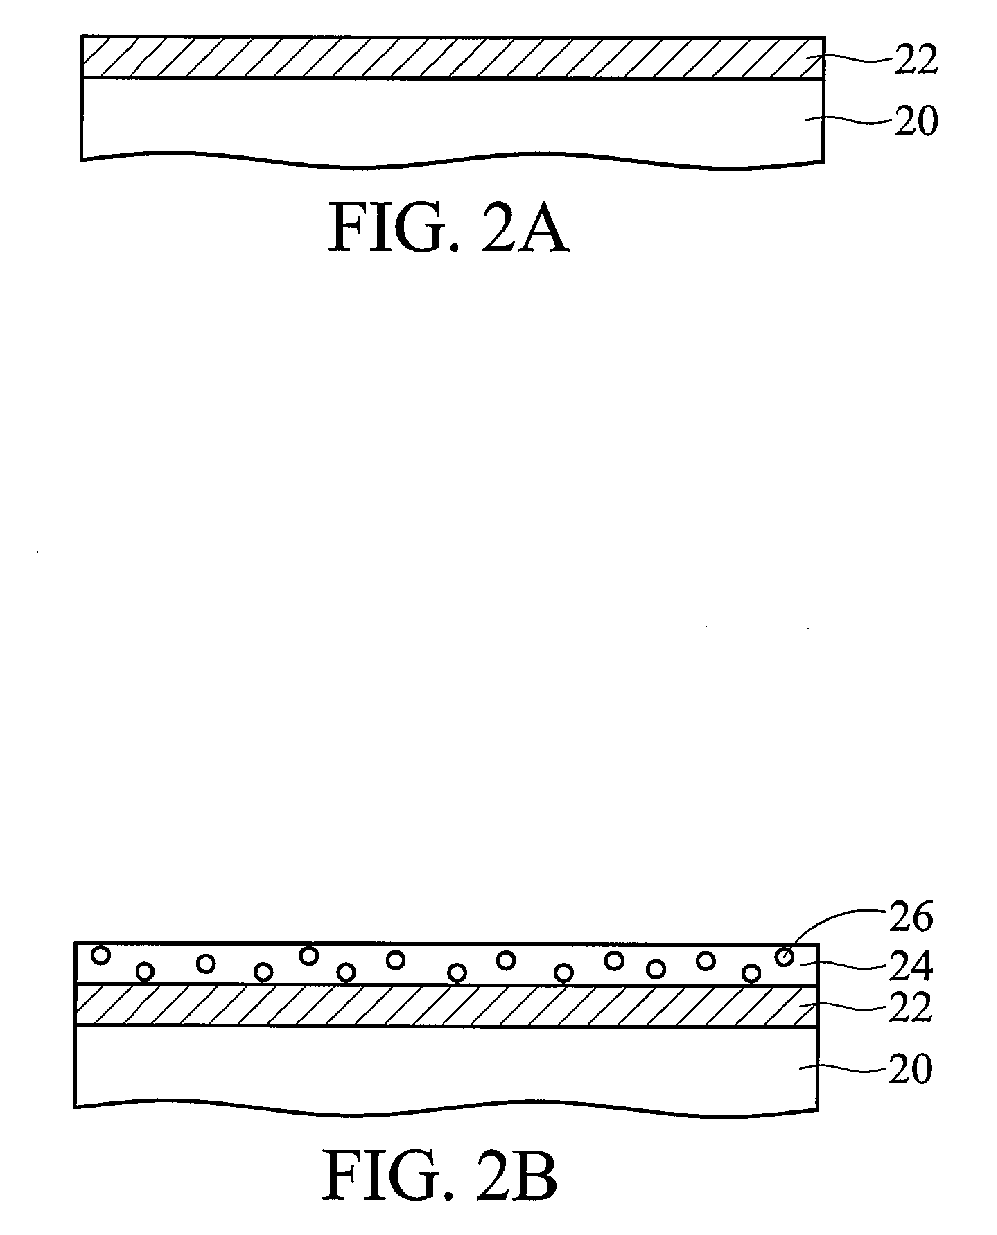 Antireflective film and method for making thereof